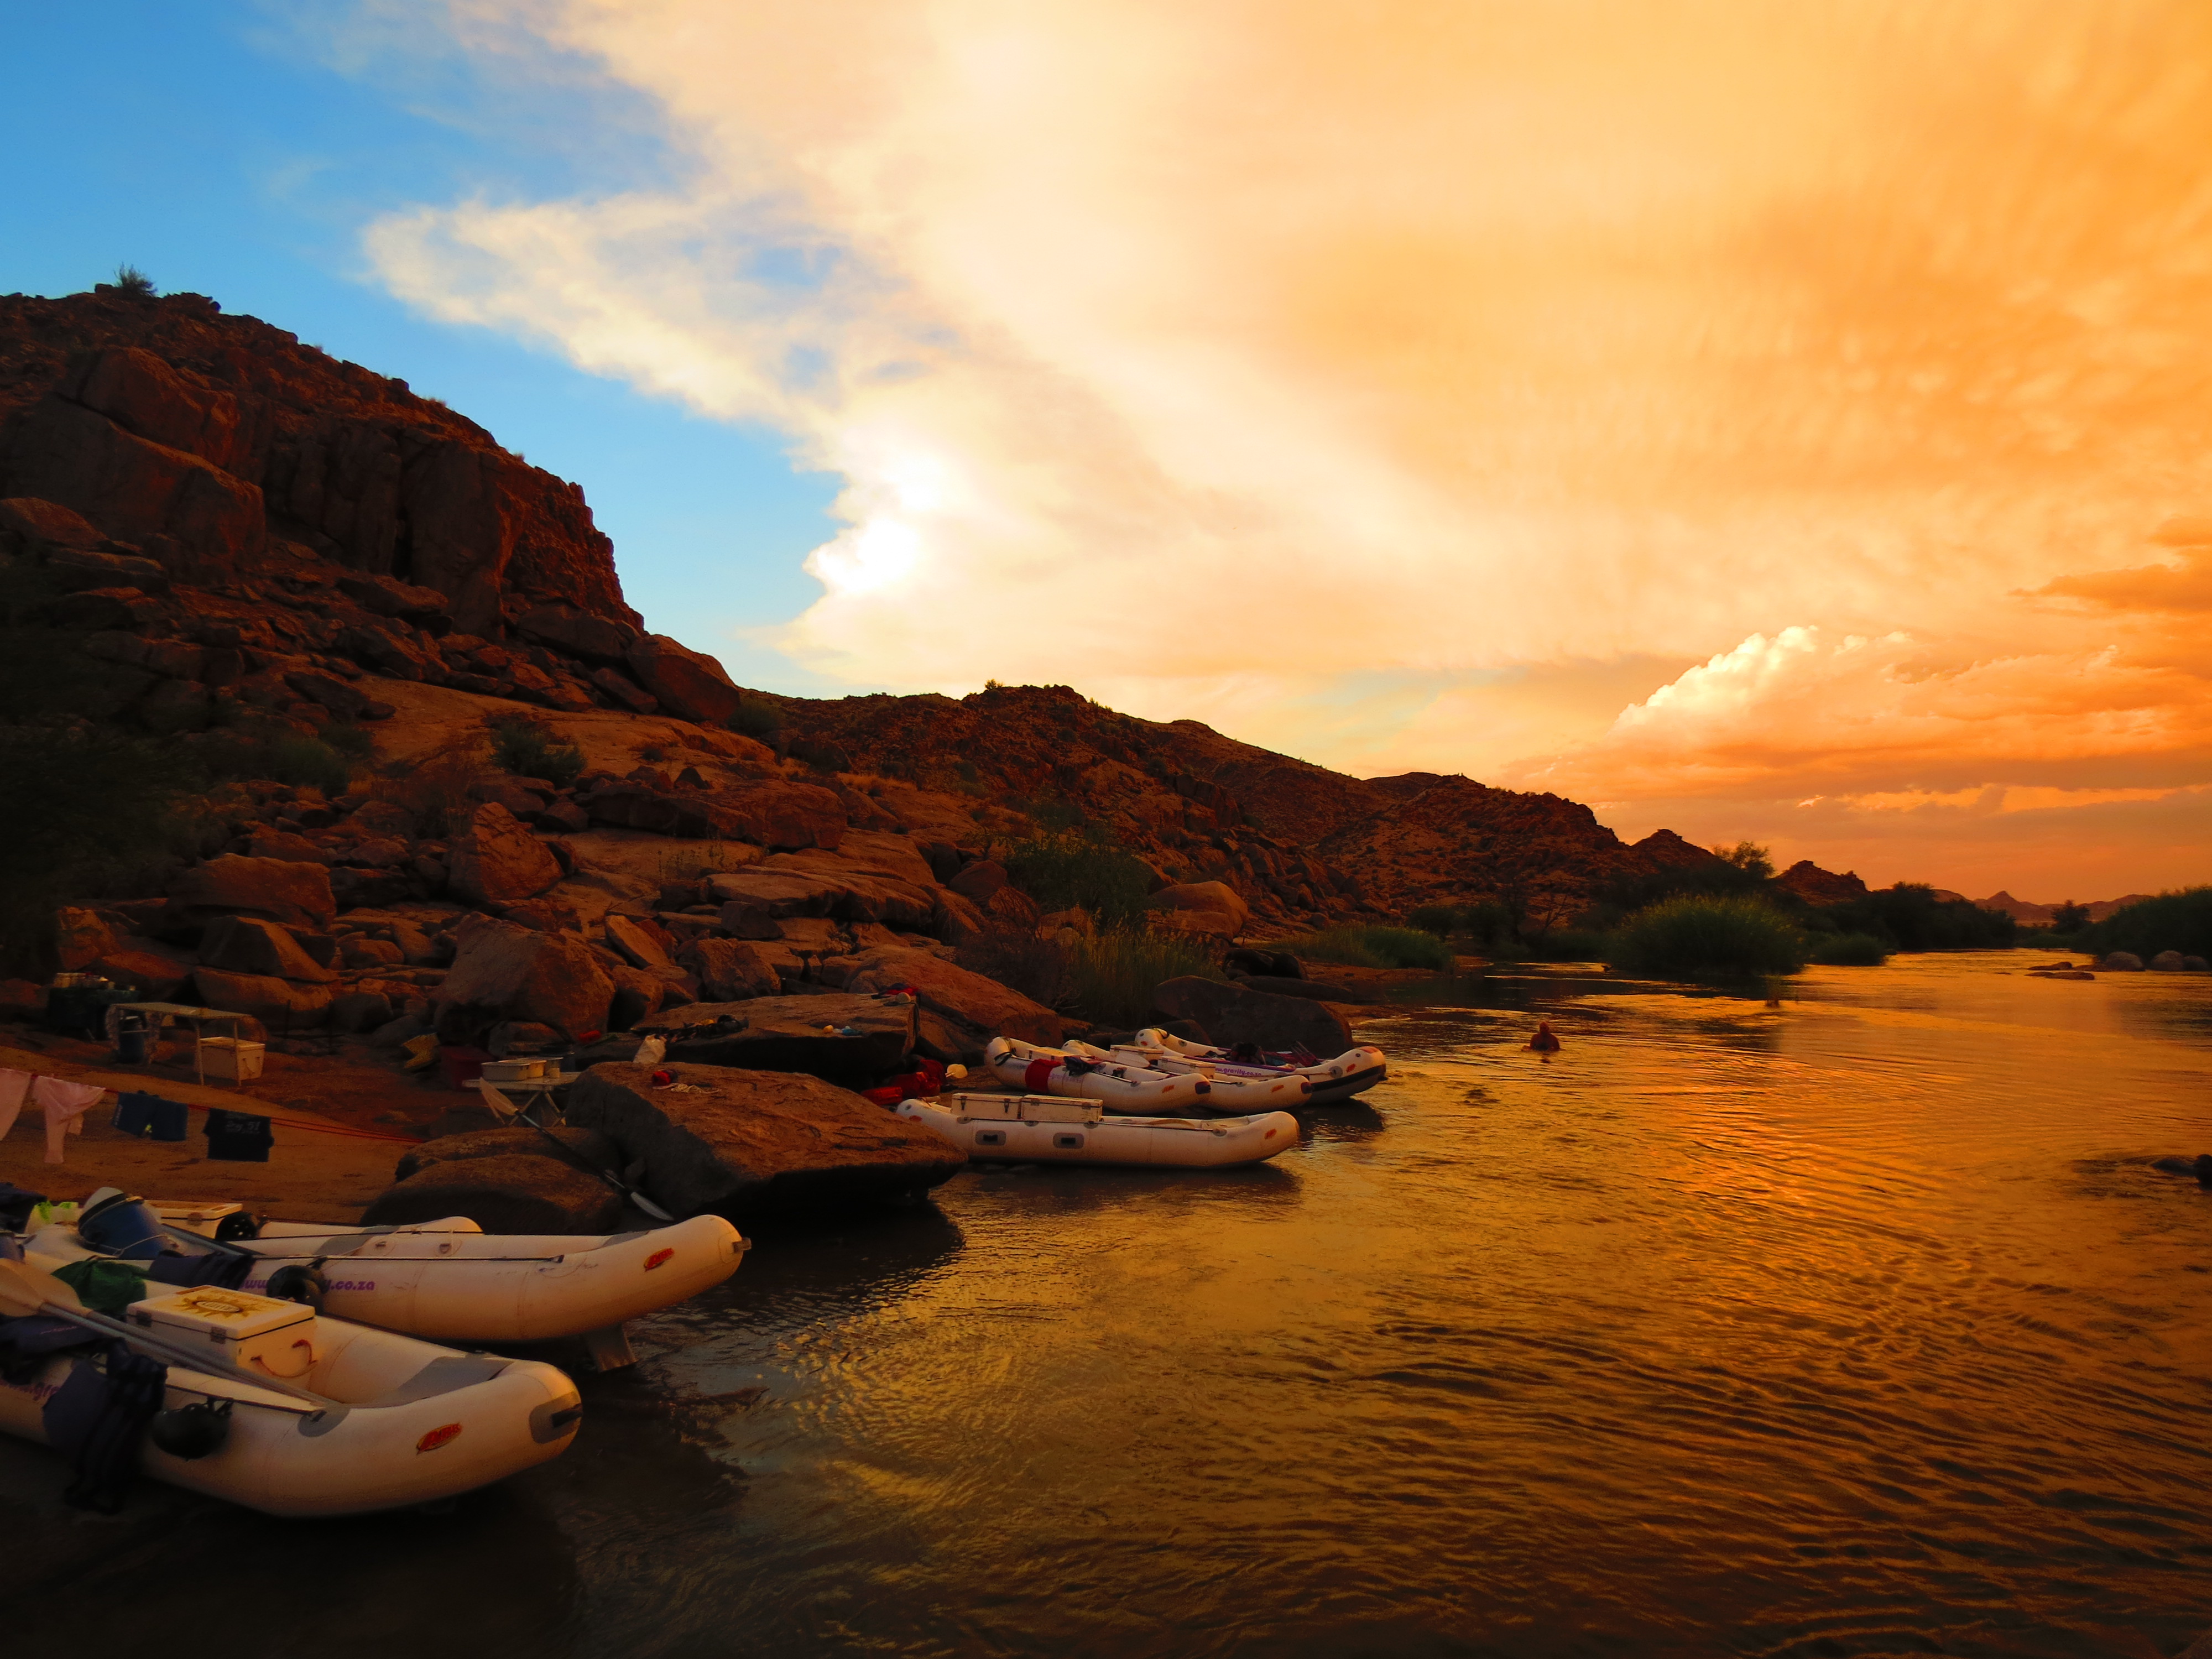 Sunset on a river camp on one of our multiday expeditions